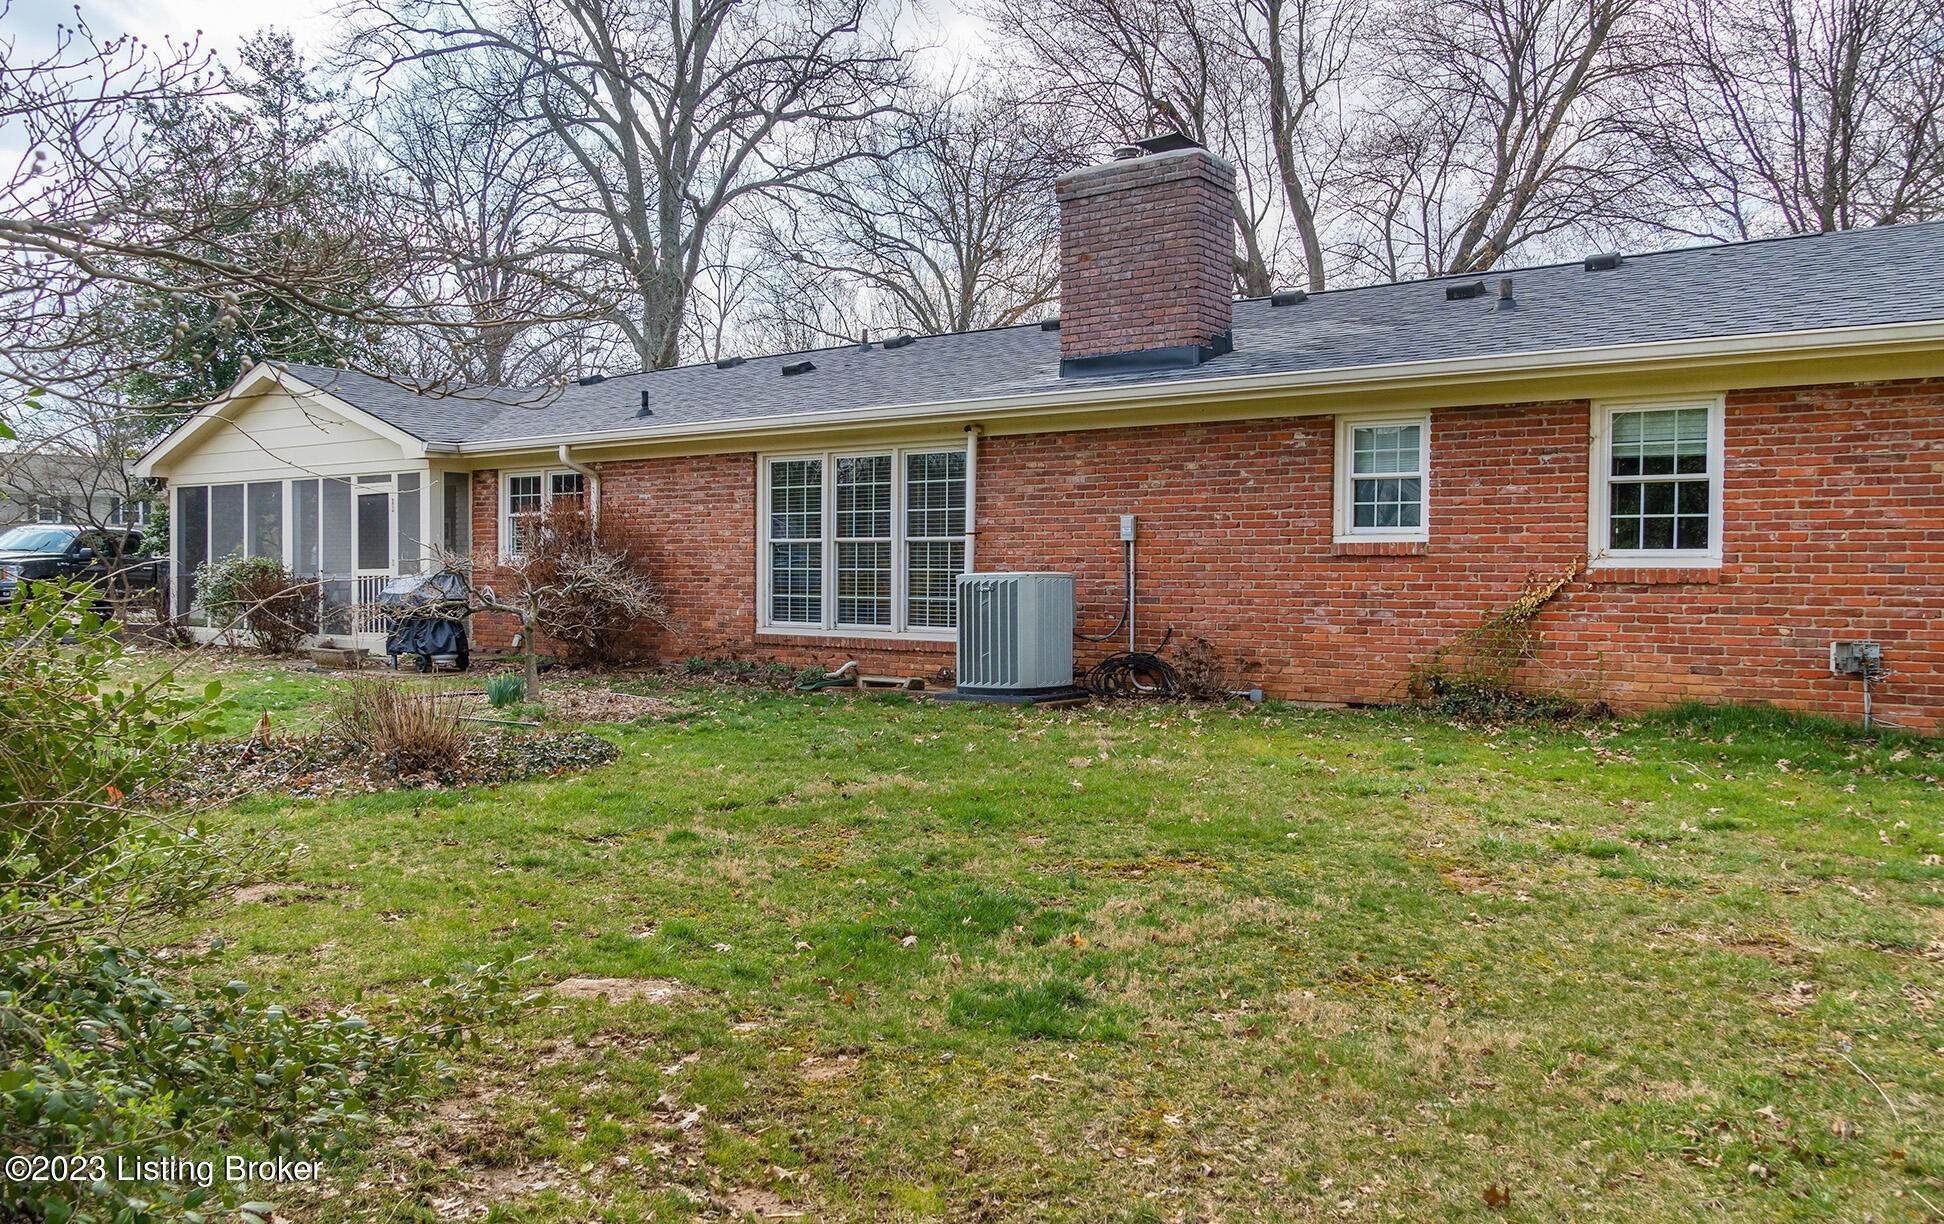 39. Single Family at Louisville, KY 40222